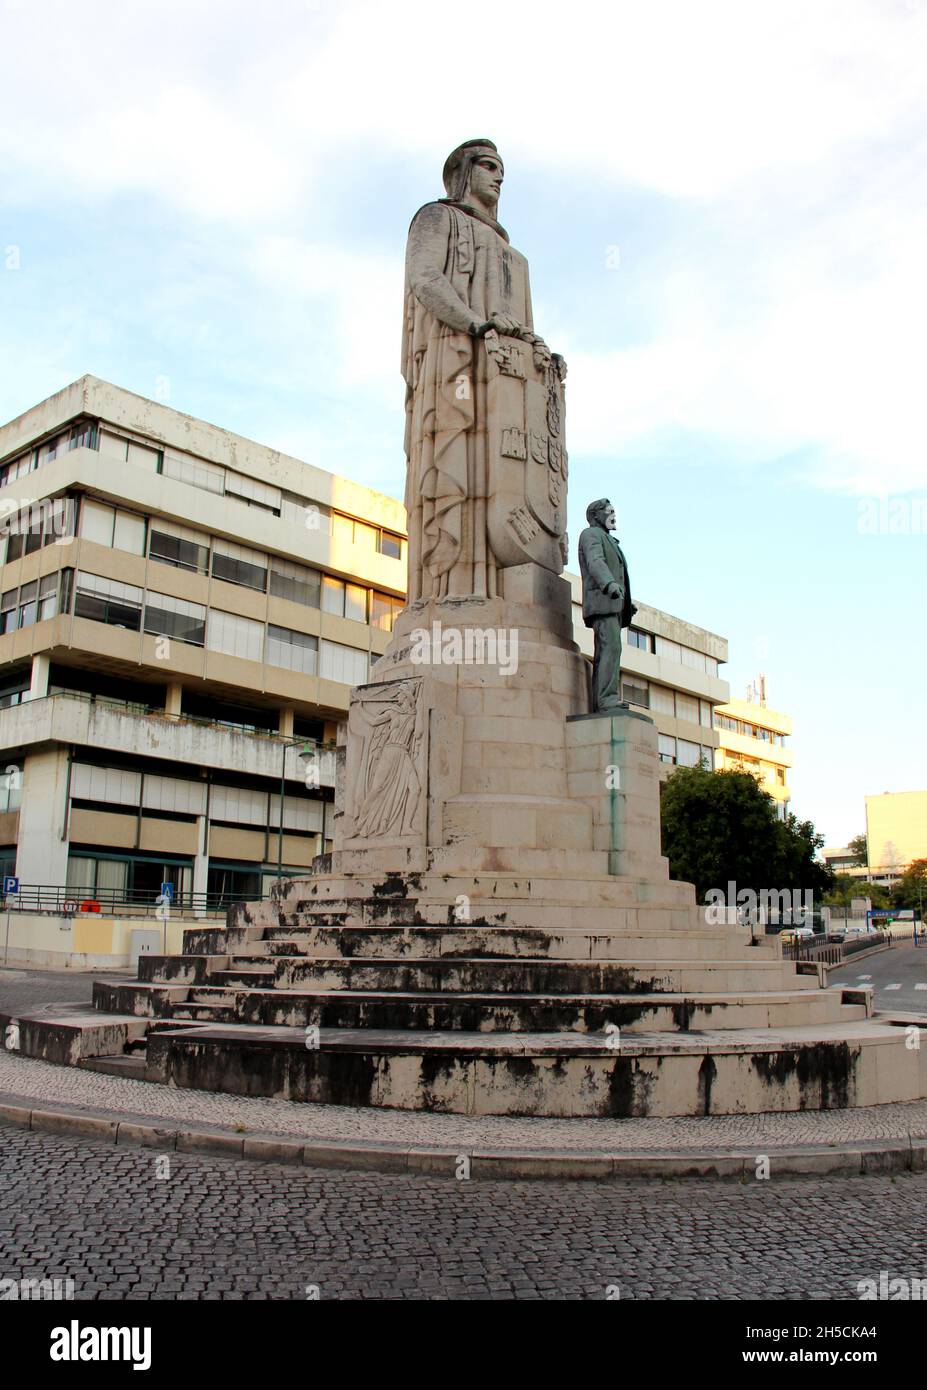 Monument to Antonio Jose de Almeda, the sixth President of Portugal from 1919 until 1923, dedicated in 1937, Lisbon, Portugal Stock Photo